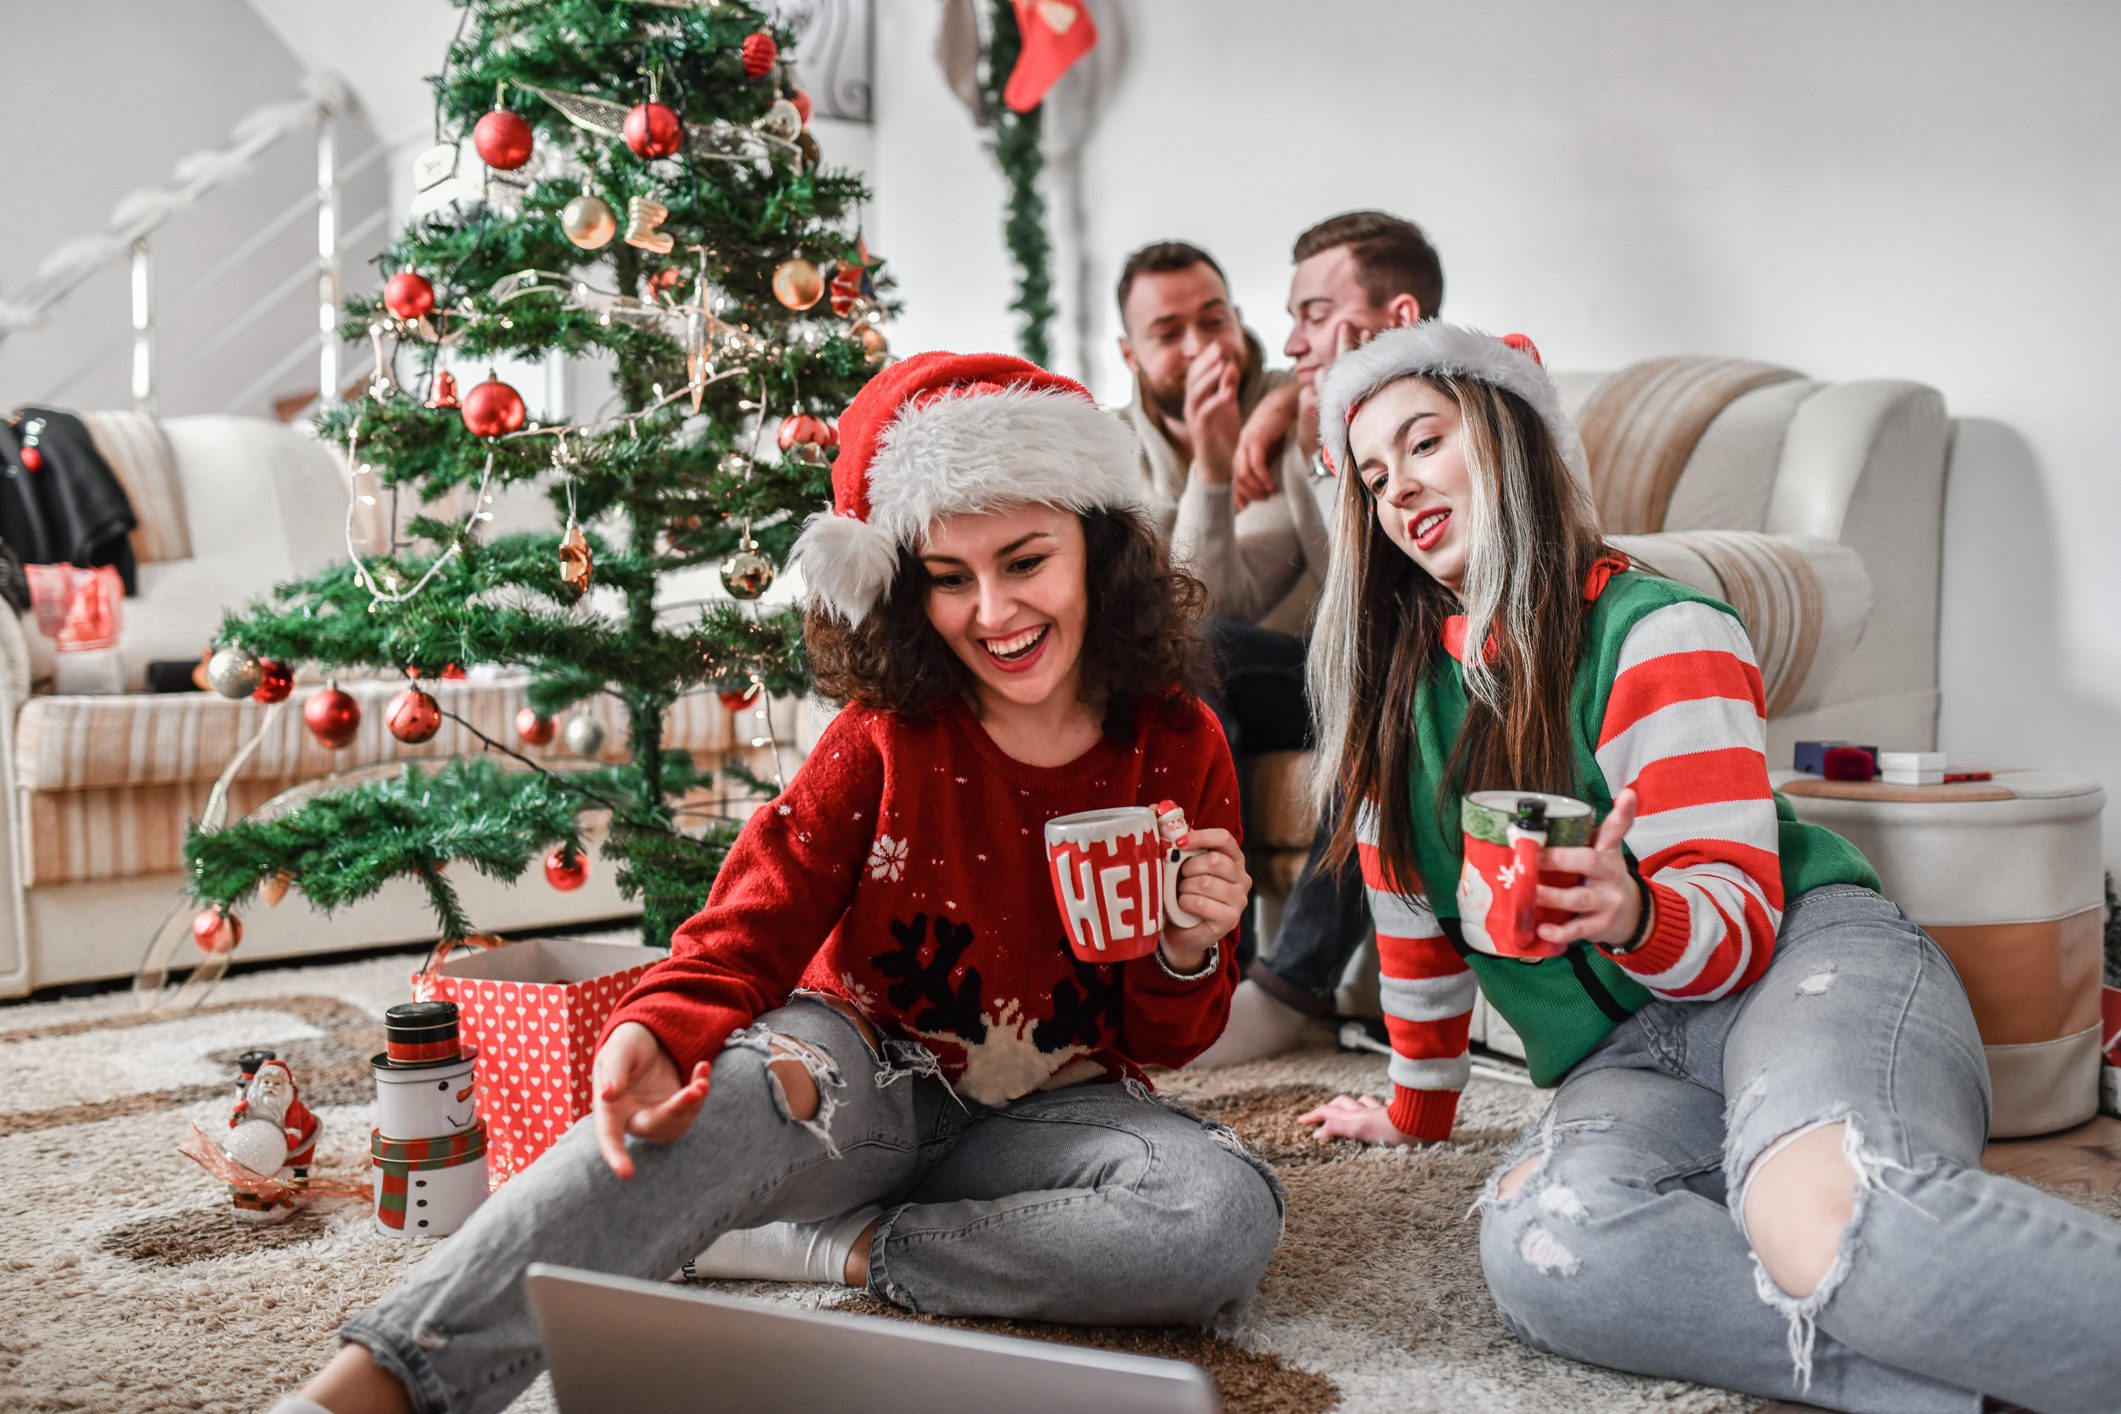 41 Best Christmas Party Games for 2022 — Fun Holiday Party Games